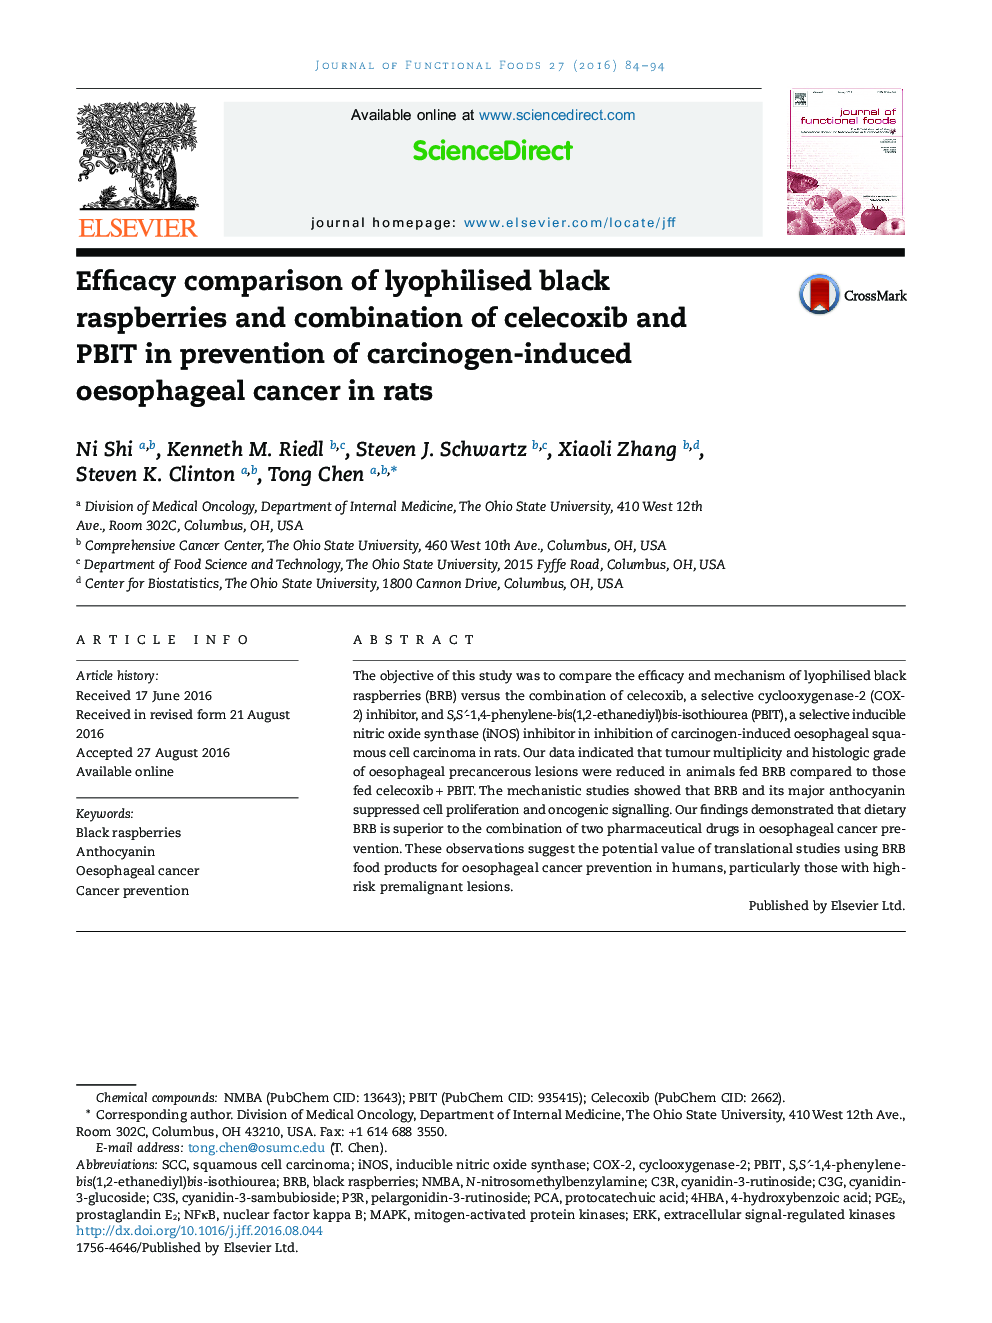 Efficacy comparison of lyophilised black raspberries and combination of celecoxib and PBIT in prevention of carcinogen-induced oesophageal cancer in rats